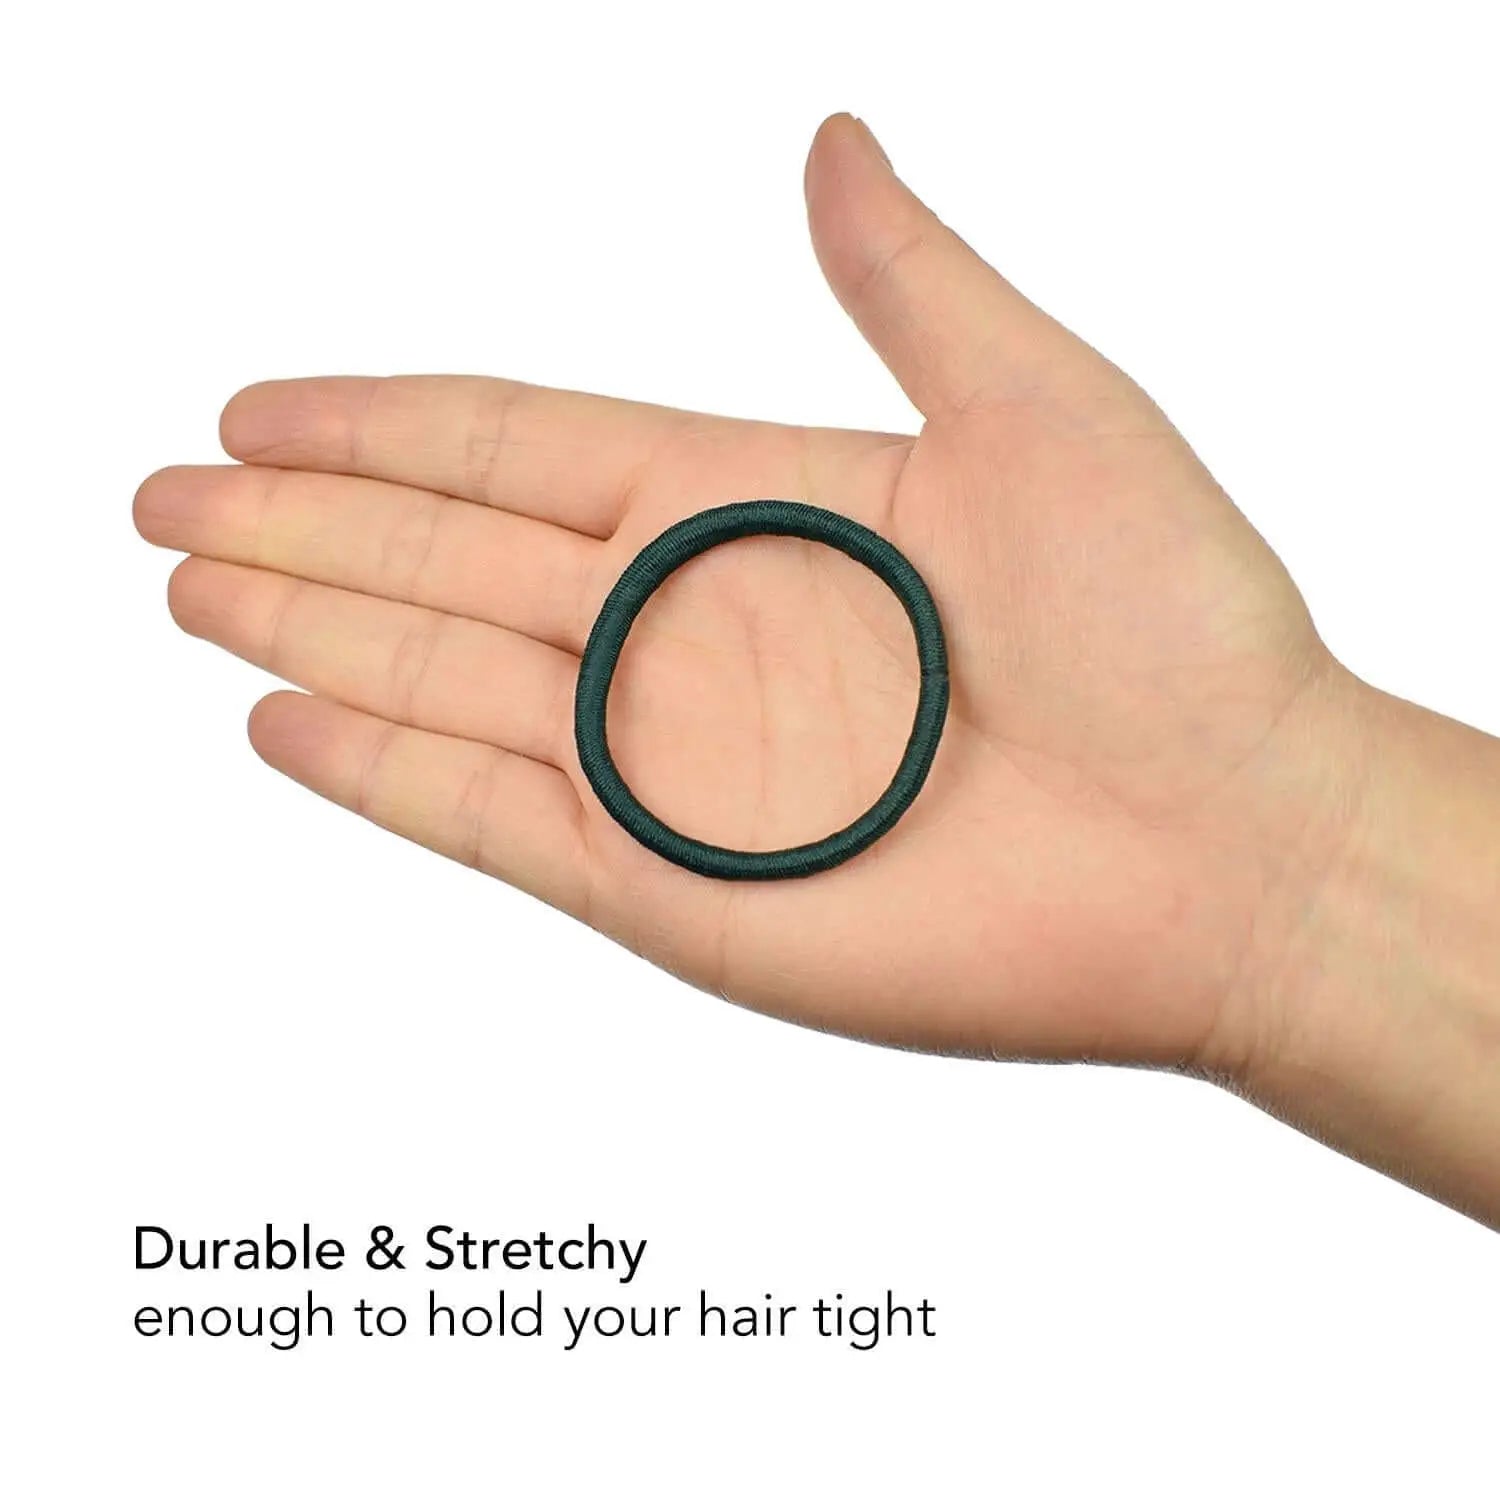 Green ring with ’drab & sty’ on 3mm soft elastic hair ties, ponytail holders - SEO-friendly alt text for product image